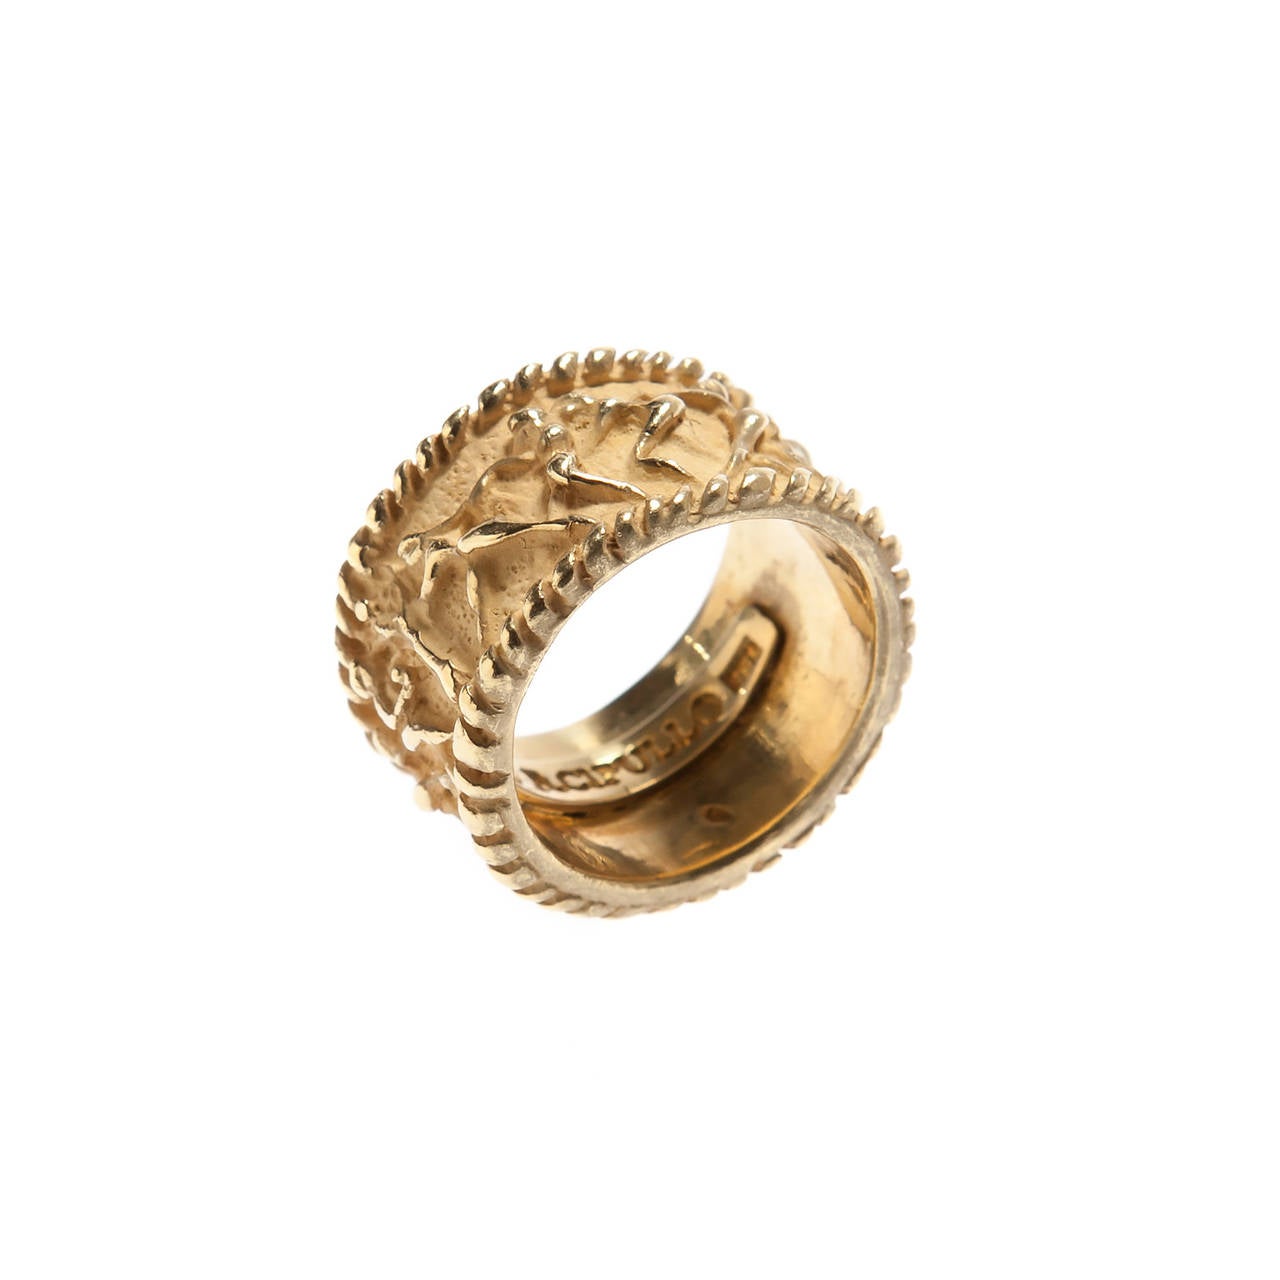 Heavy 18kt Yellow Gold ring with Allegoric figures
A Renato Cipullo vintage piece from 1972
Size 6